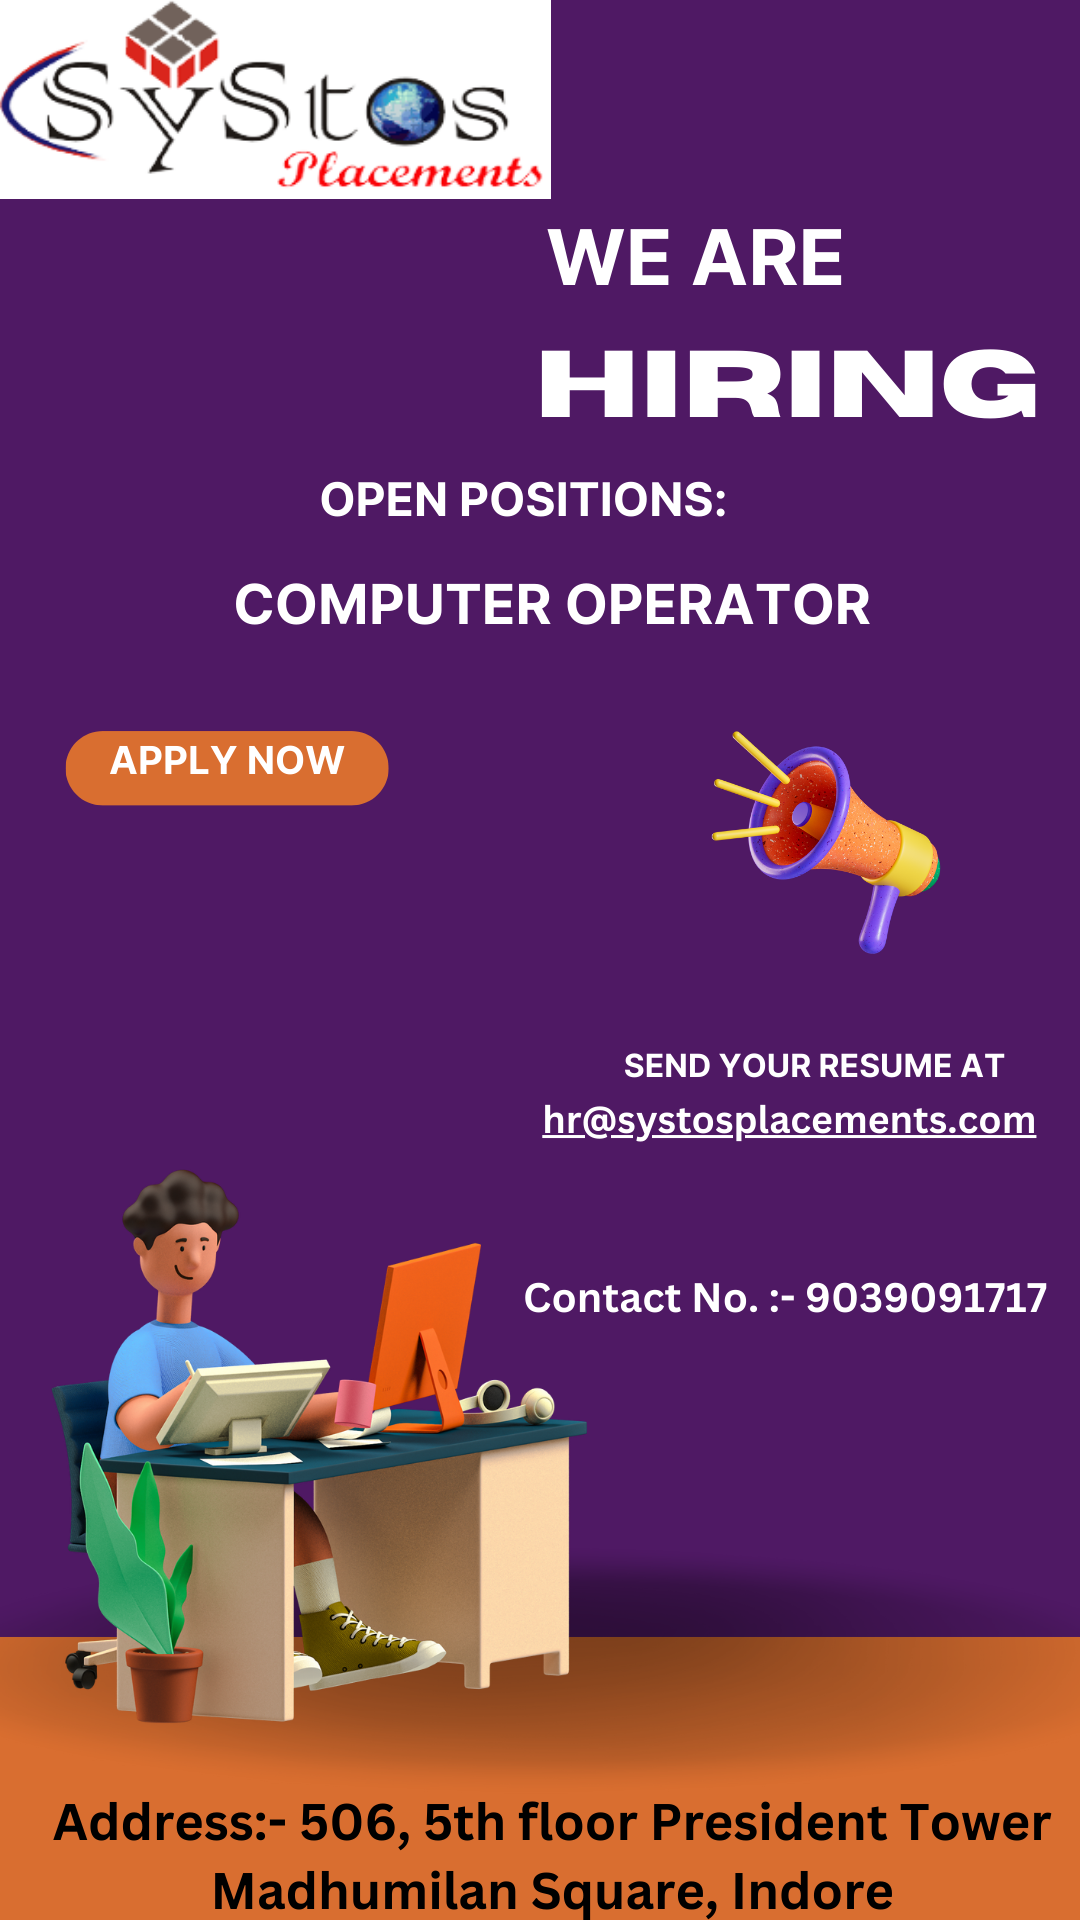 <>

SY 7S St@s

 

SLAs

WE ARE
HIRING
OPEN POSITIONS:
COMPUTER OPERATOR
L >
x
SEND YOUR RESUME AT

hr@systosplacements.com

Contact No. :- 9039091717

Address:- 506, 5th floor President Tower
Madhumilan Square, Indore